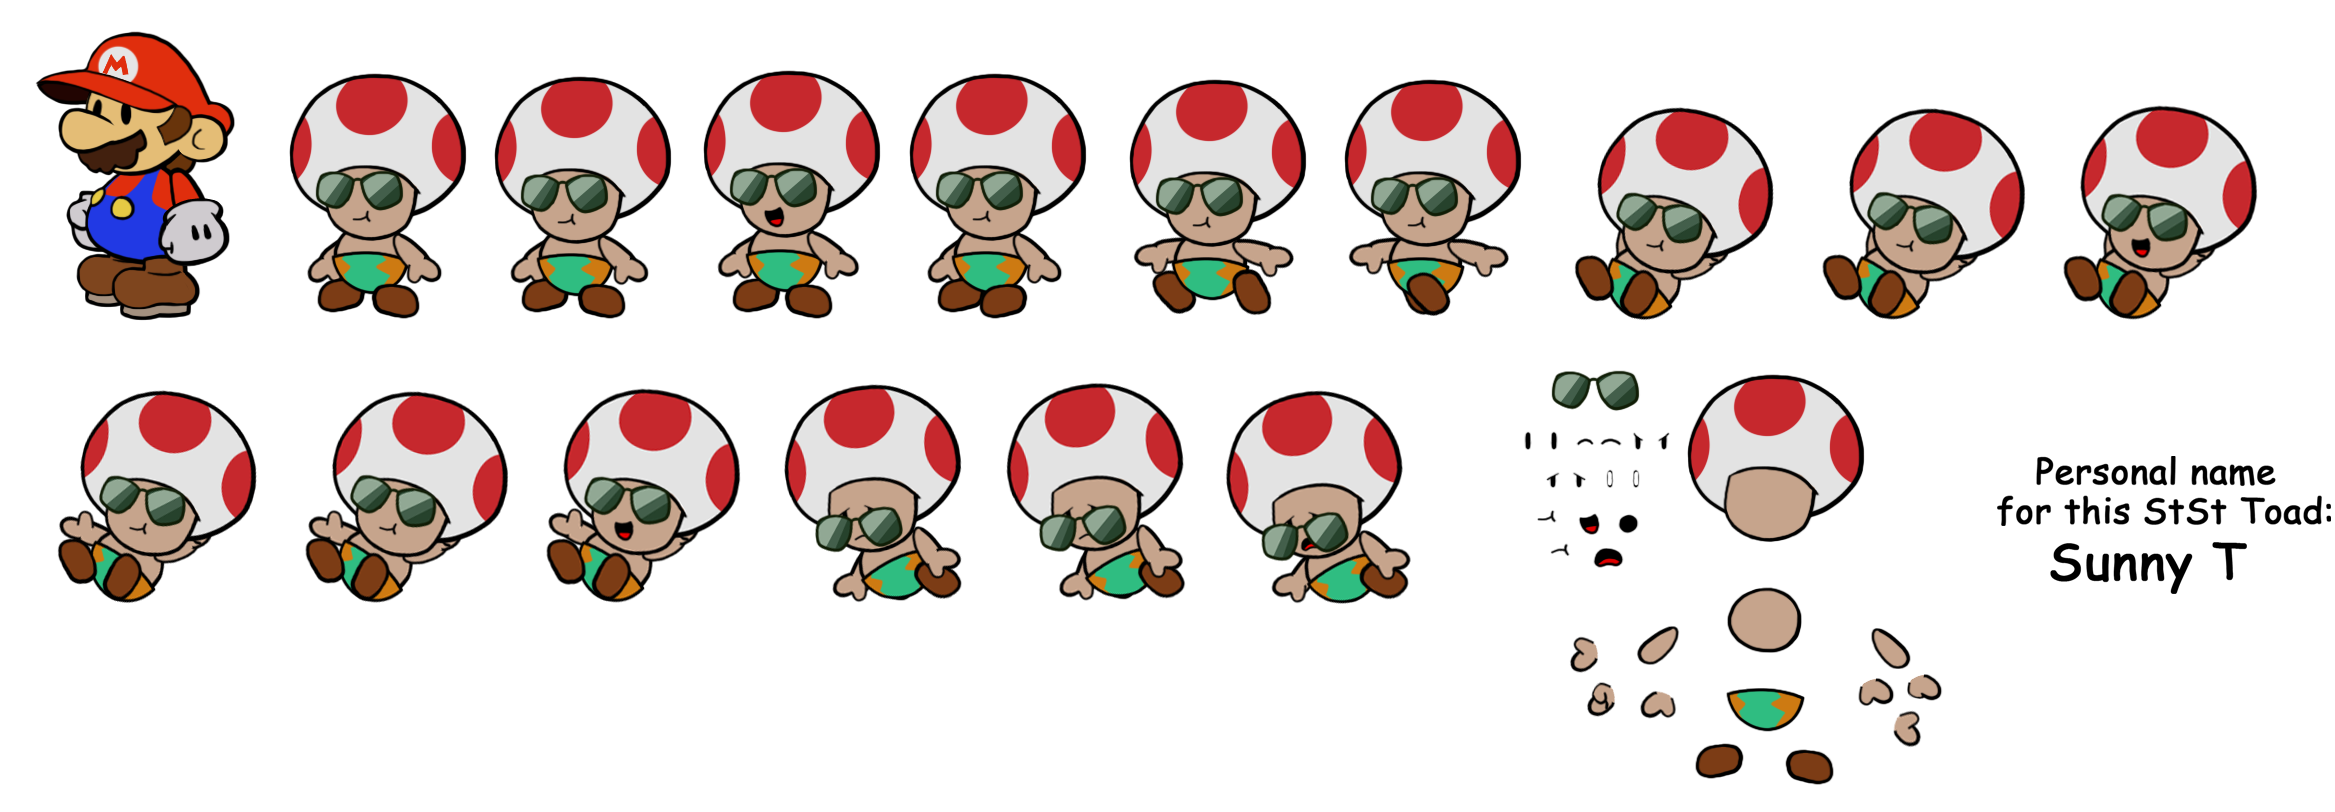 Custom Edited Paper Mario Customs Oasis Toad Paper Mario Style The Spriters Resource 2311